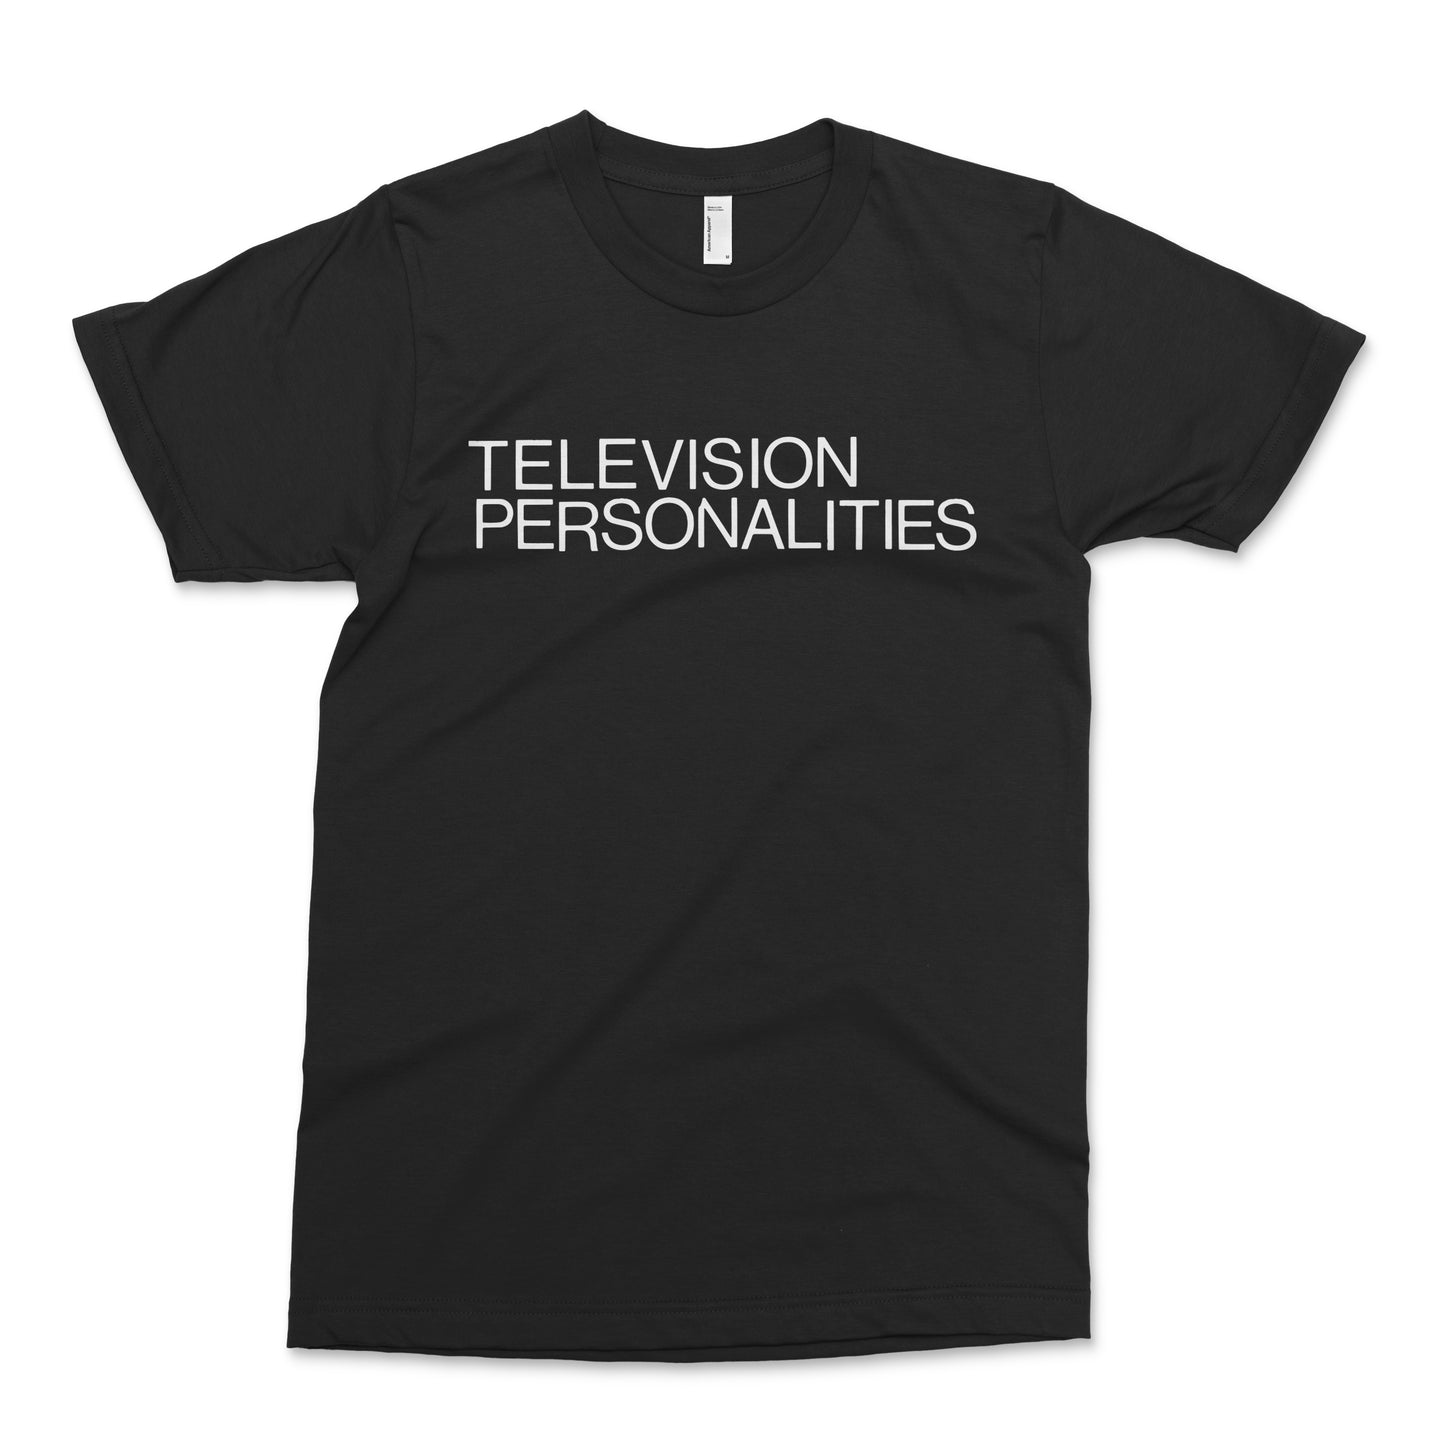 Television Personalities - Classic Black Shirt